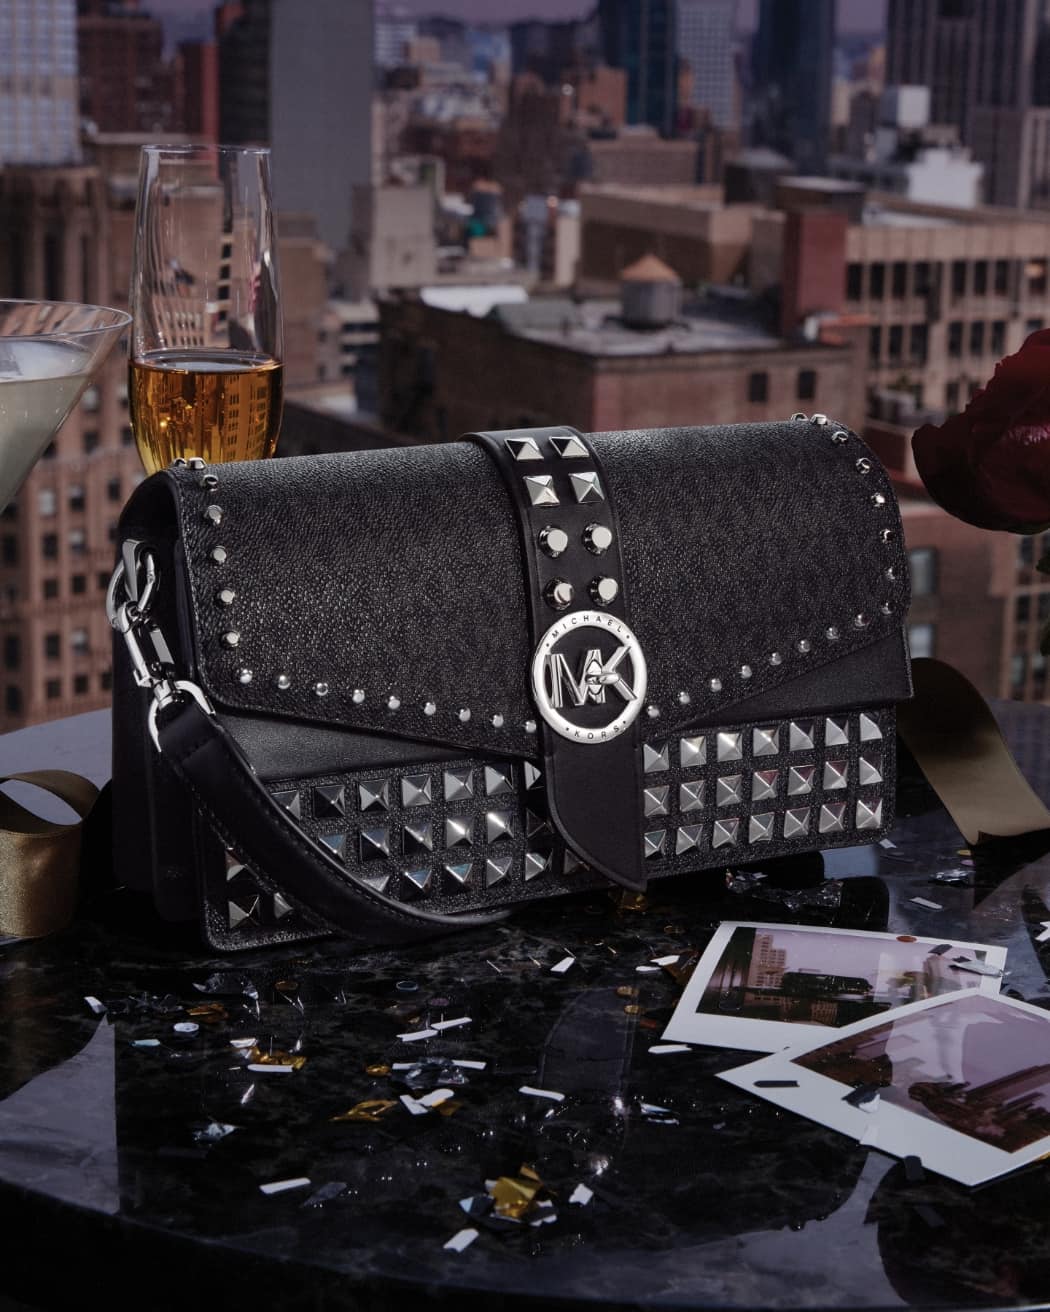 Michael Kors: Winter Sale featuring 25% off sitewide with up to 60% off sale